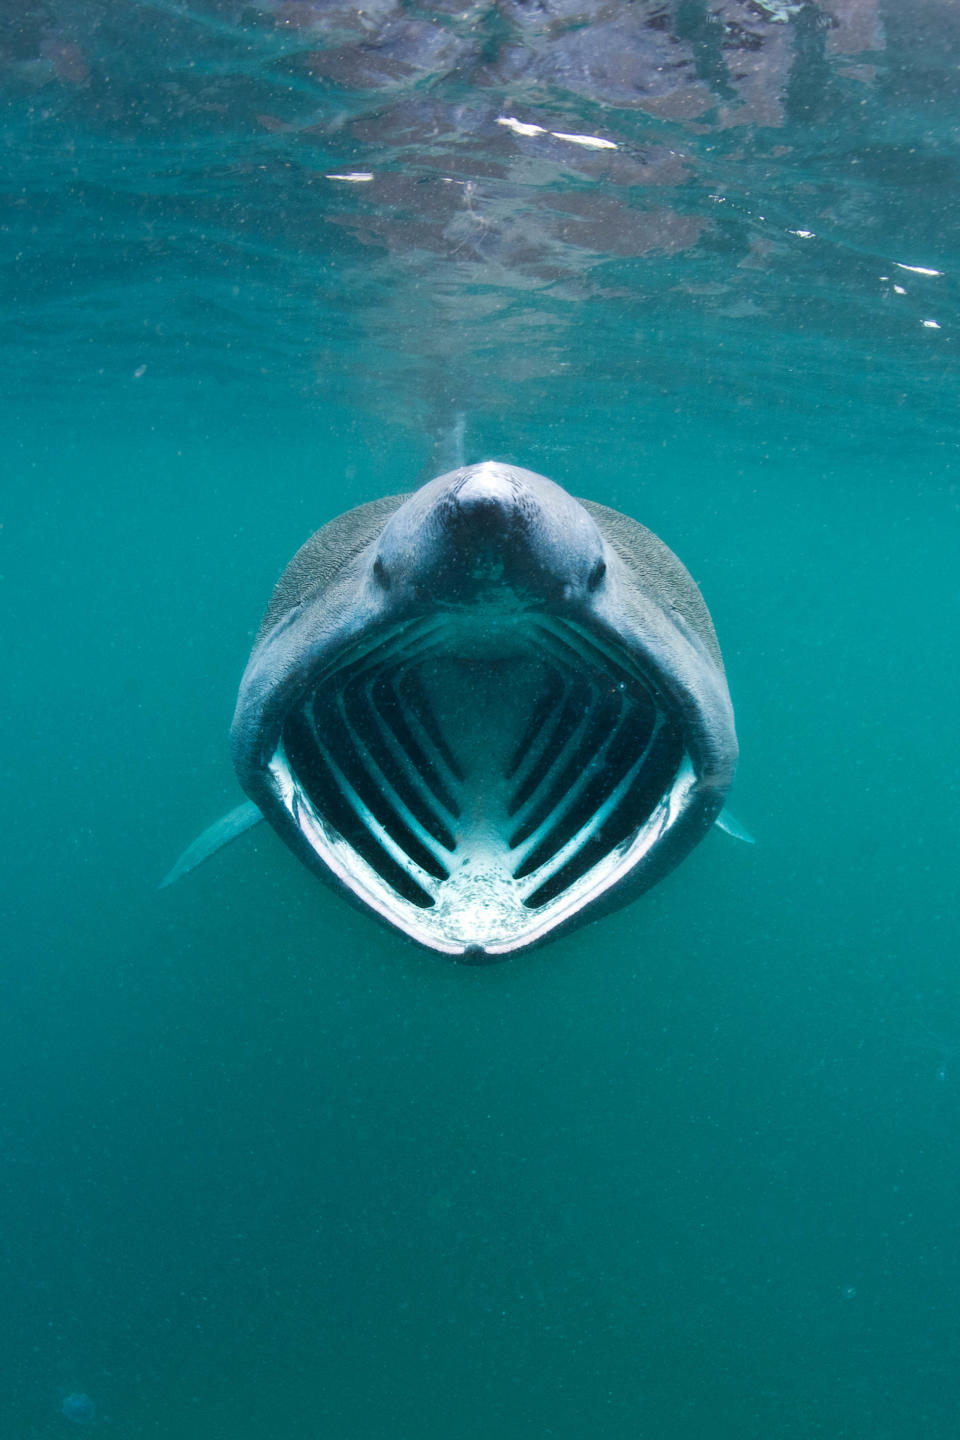 A basking shark with its mouth wide open feeding on plankton concentrated in surface waters close to the island of Coll, Inner Hebrides, Scotland (BBC/Silverback Films/Alex Mustard/2020VISION/naturepl.com/PA)